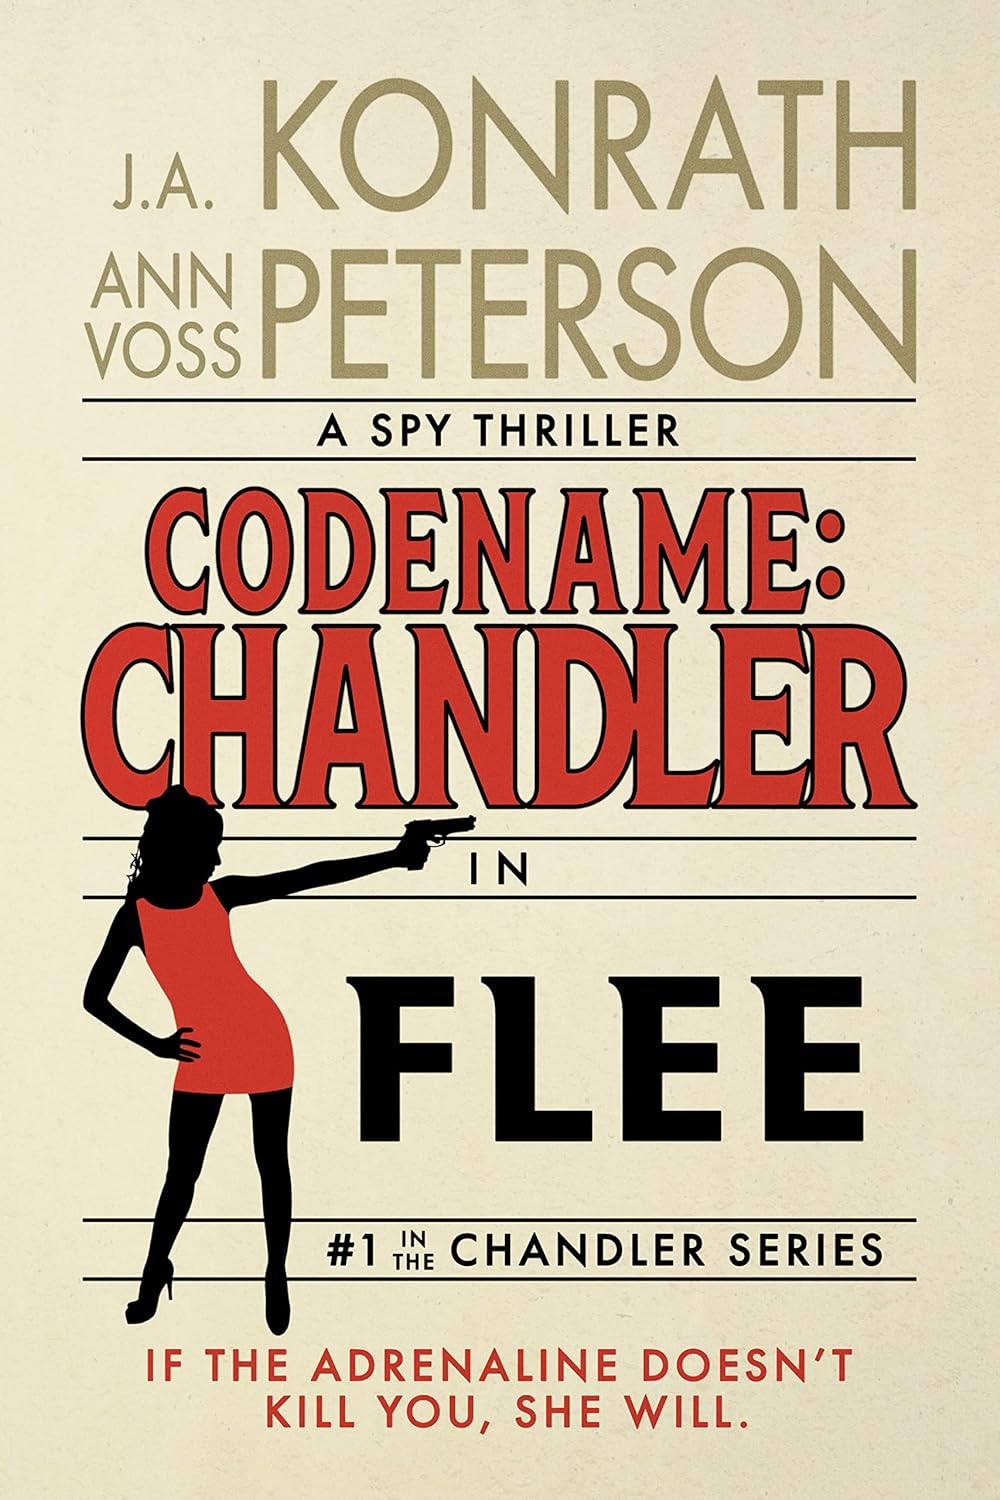 Flee Codename: Chandler by Bestselling Author J.A Konrath, & Ann Voss Peterson